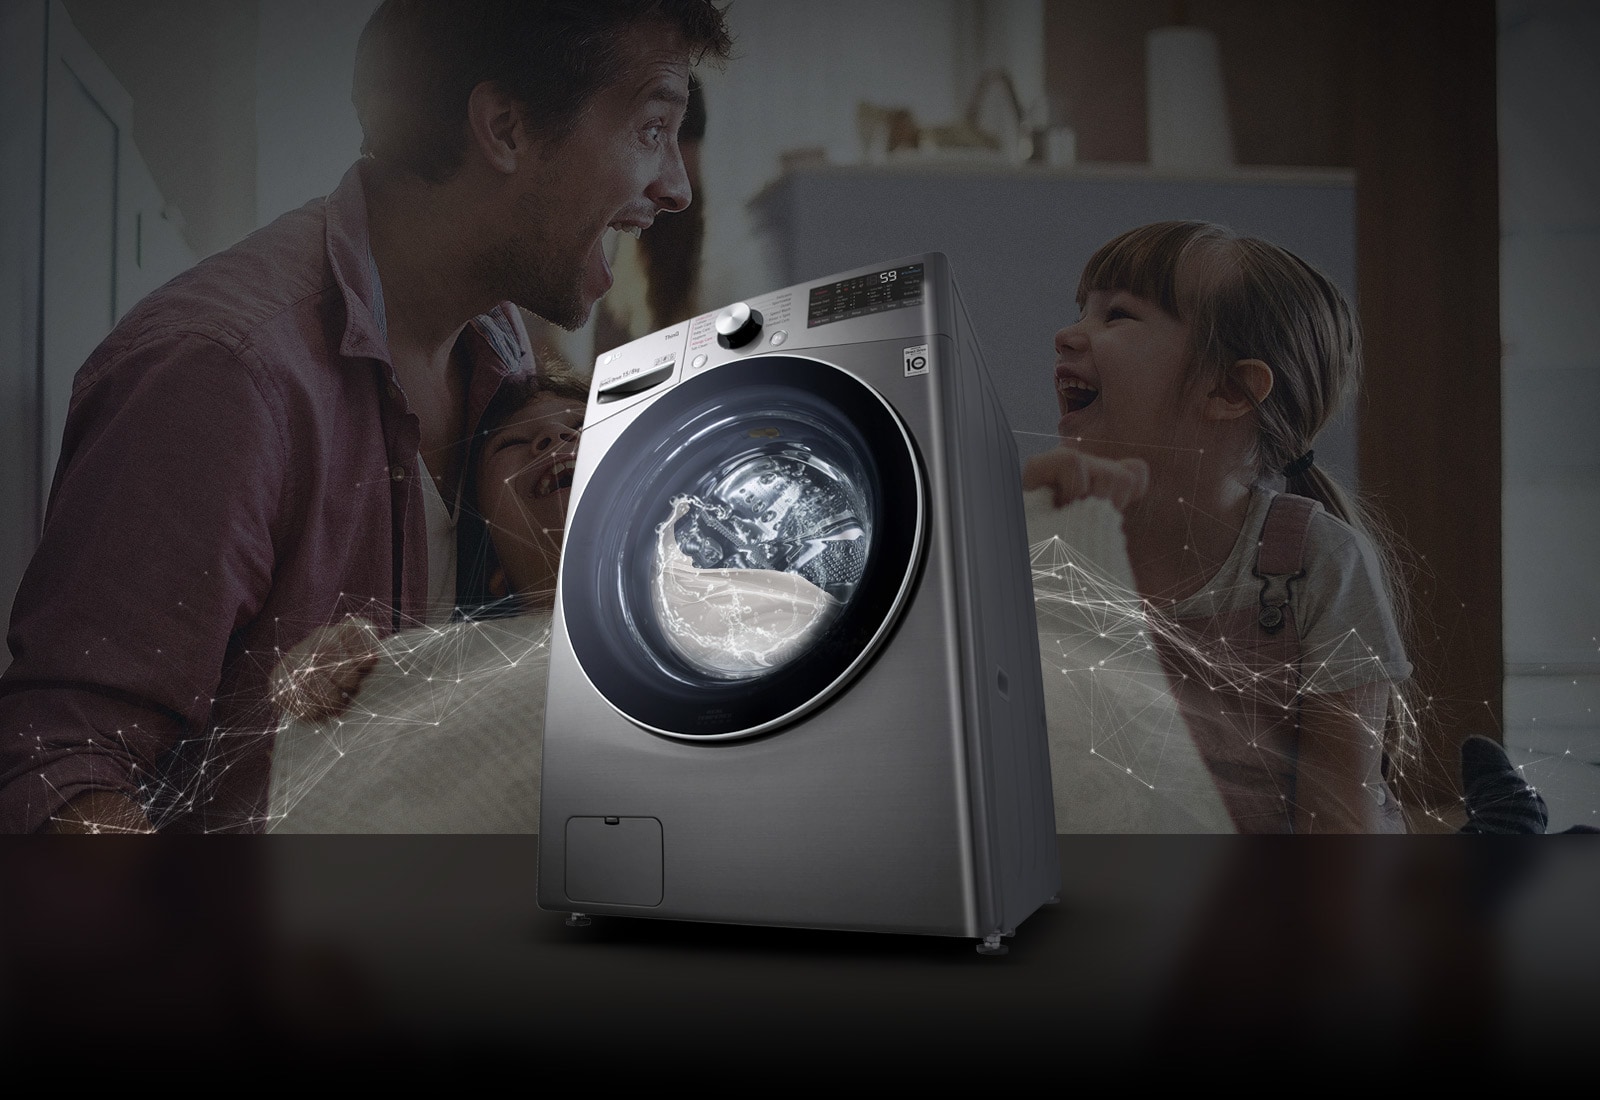 Father and daughters laugh in the background as they hold a clean blanket. A White washing machine front load washer in the foreground.